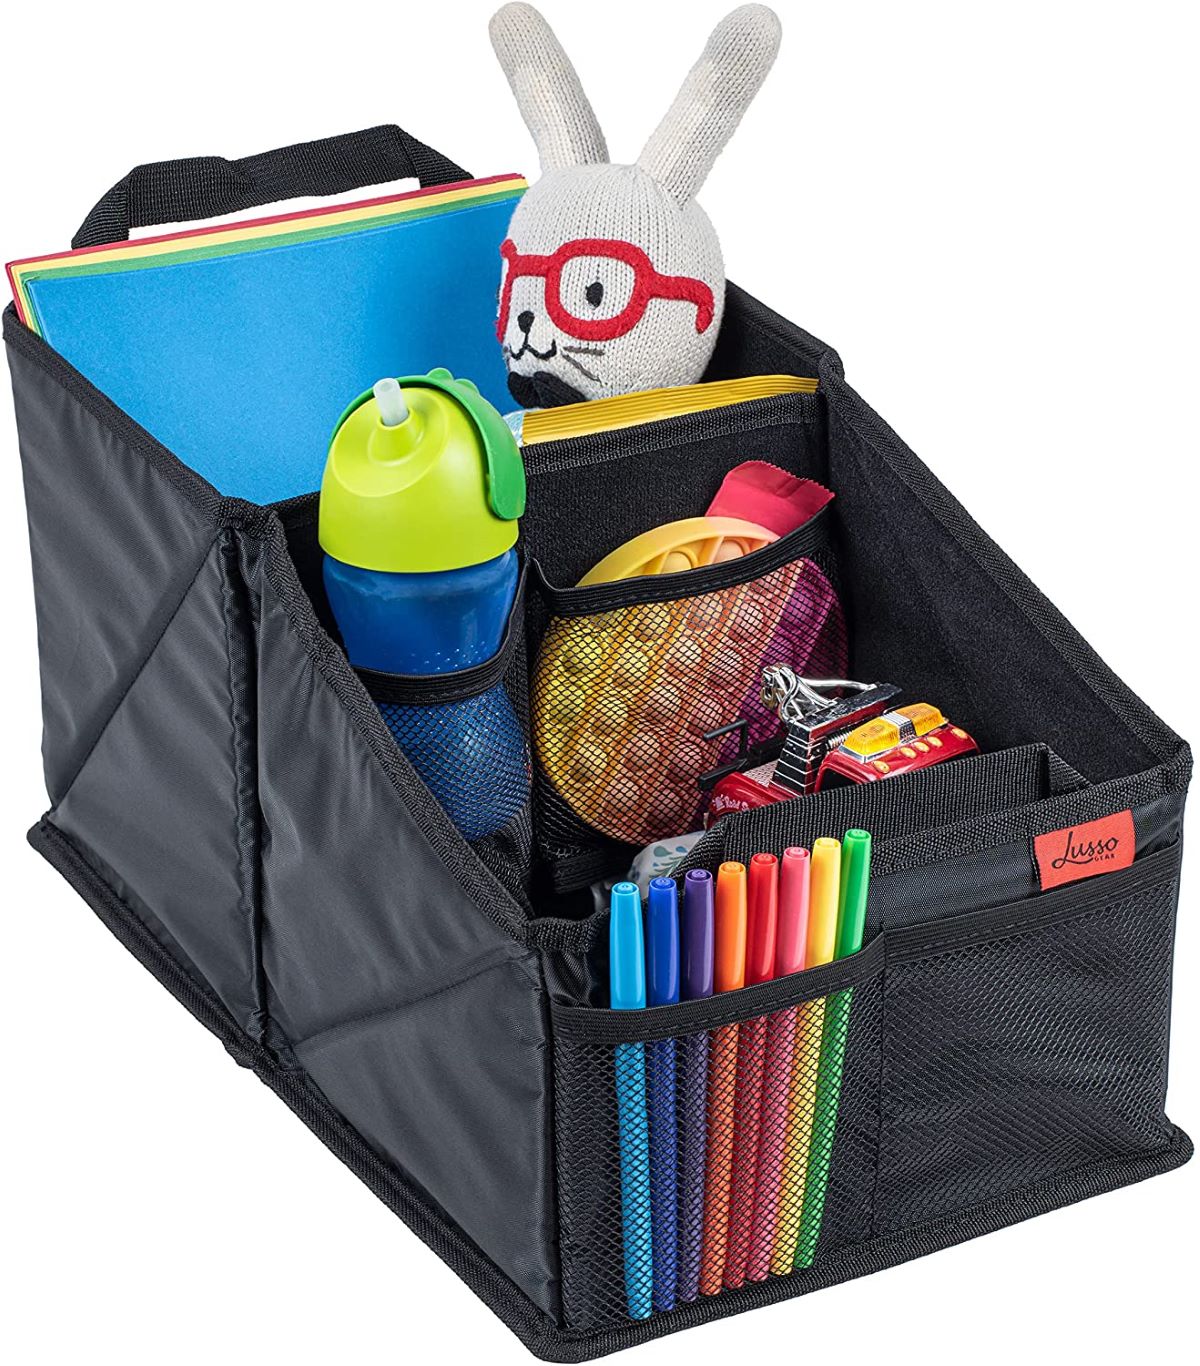 A tote car organizer filled with children's toys.  A tote like this is one of the best car storage accessories.